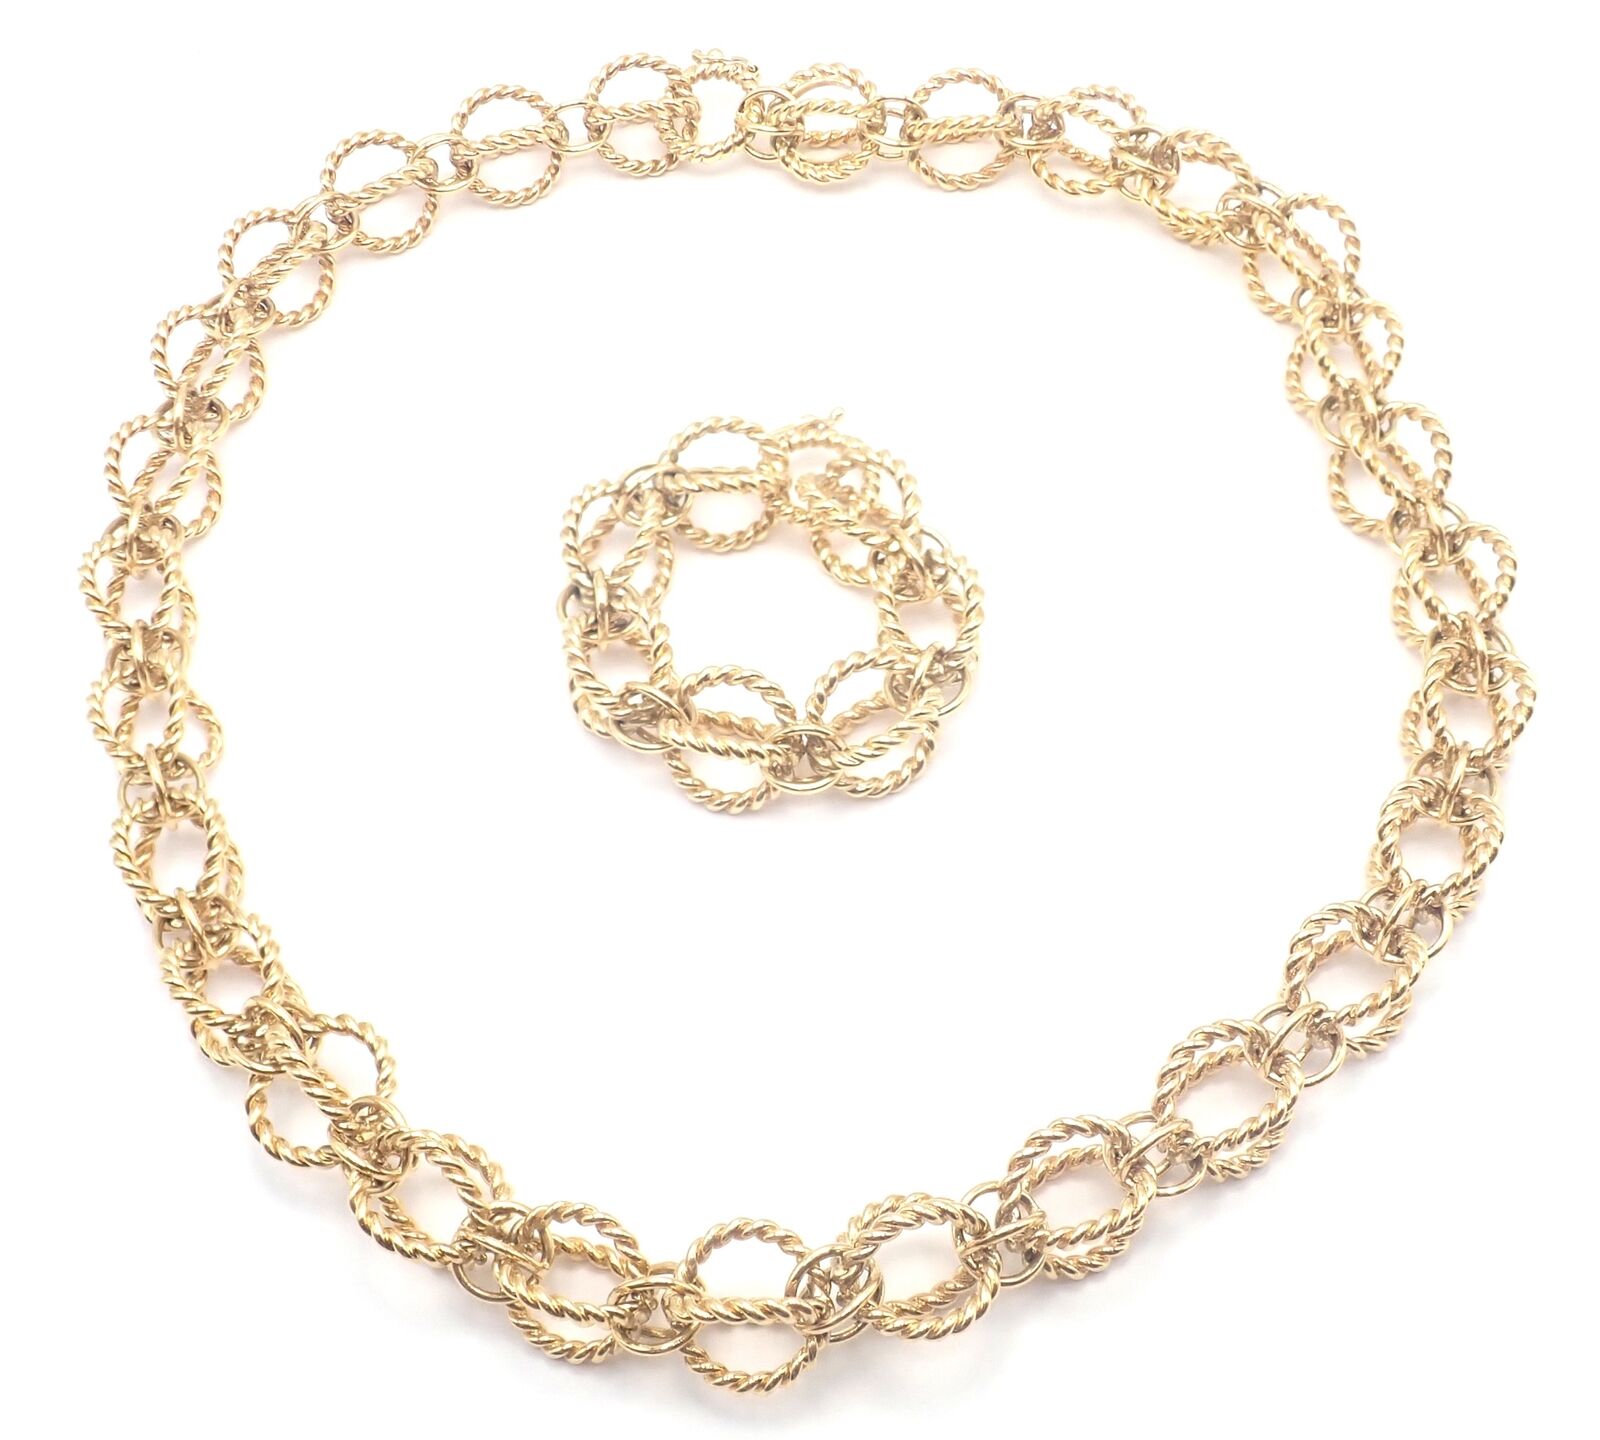 Jean Schlumberger for Tiffany & Co. Jewelry & Watches:Fine Jewelry:Necklaces & Pendants Tiffany & Co Schlumberger Circle Rope 18k Yellow Gold Long 23" Link Necklace